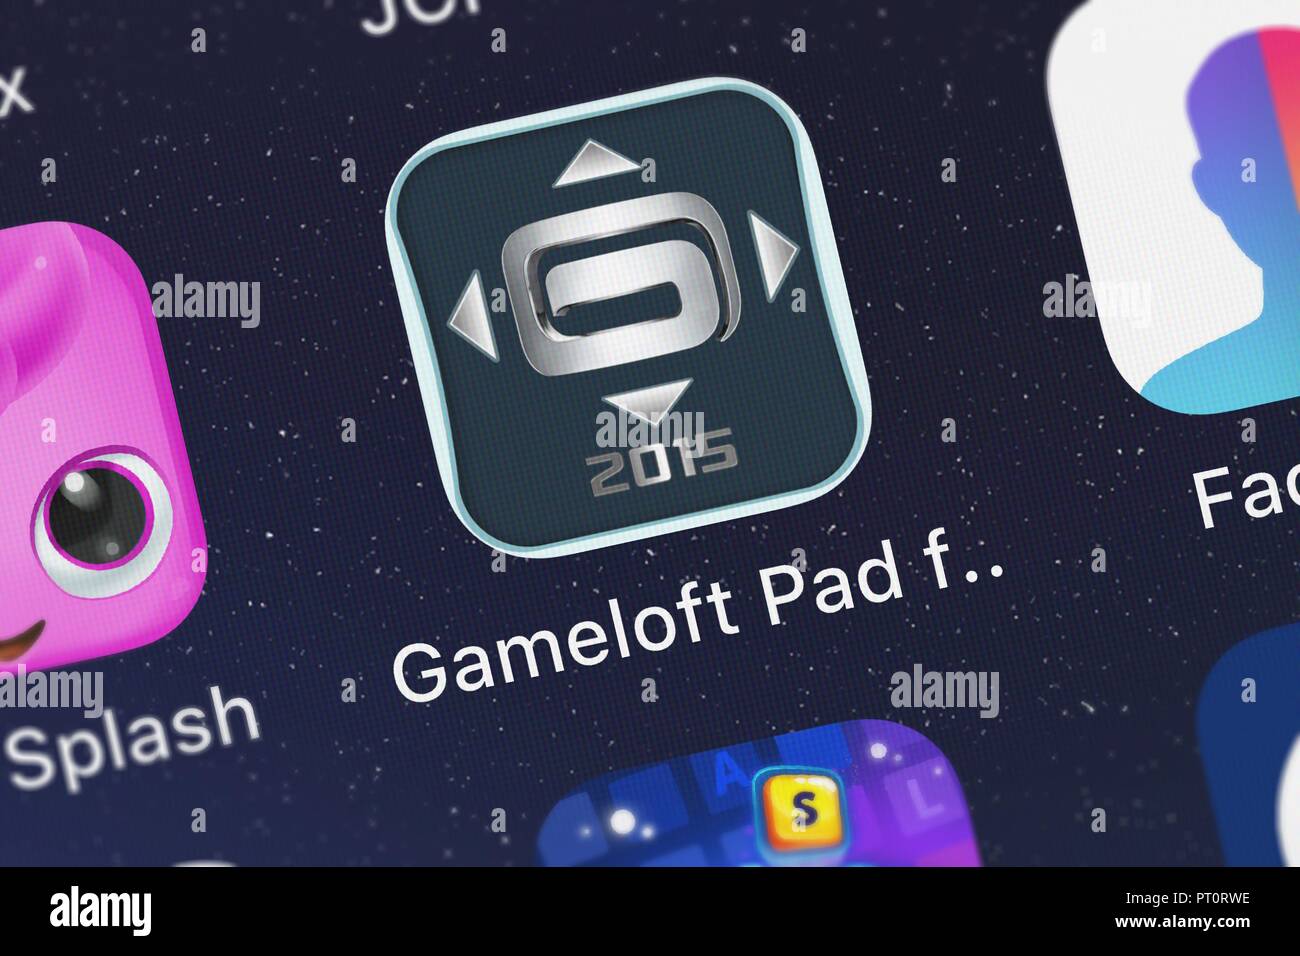 London, United Kingdom - October 05, 2018: Close-up of the Gameloft Pad for Samsung Smart TV (2015) icon from Gameloft on an iPhone. Stock Photo